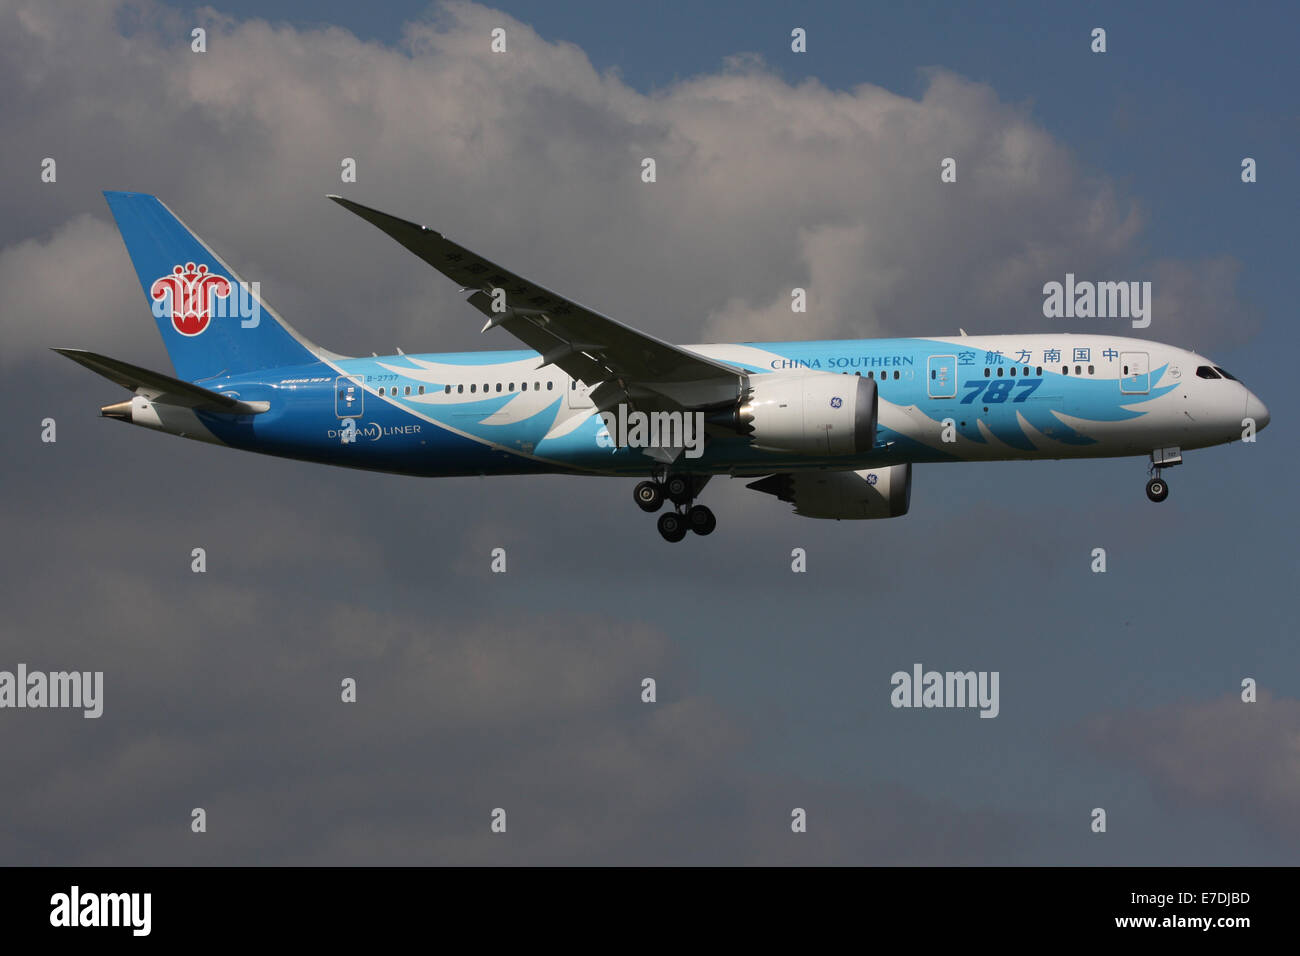 CHINA SOUTHERN AIRLINES BOEING 787 Stock Photo